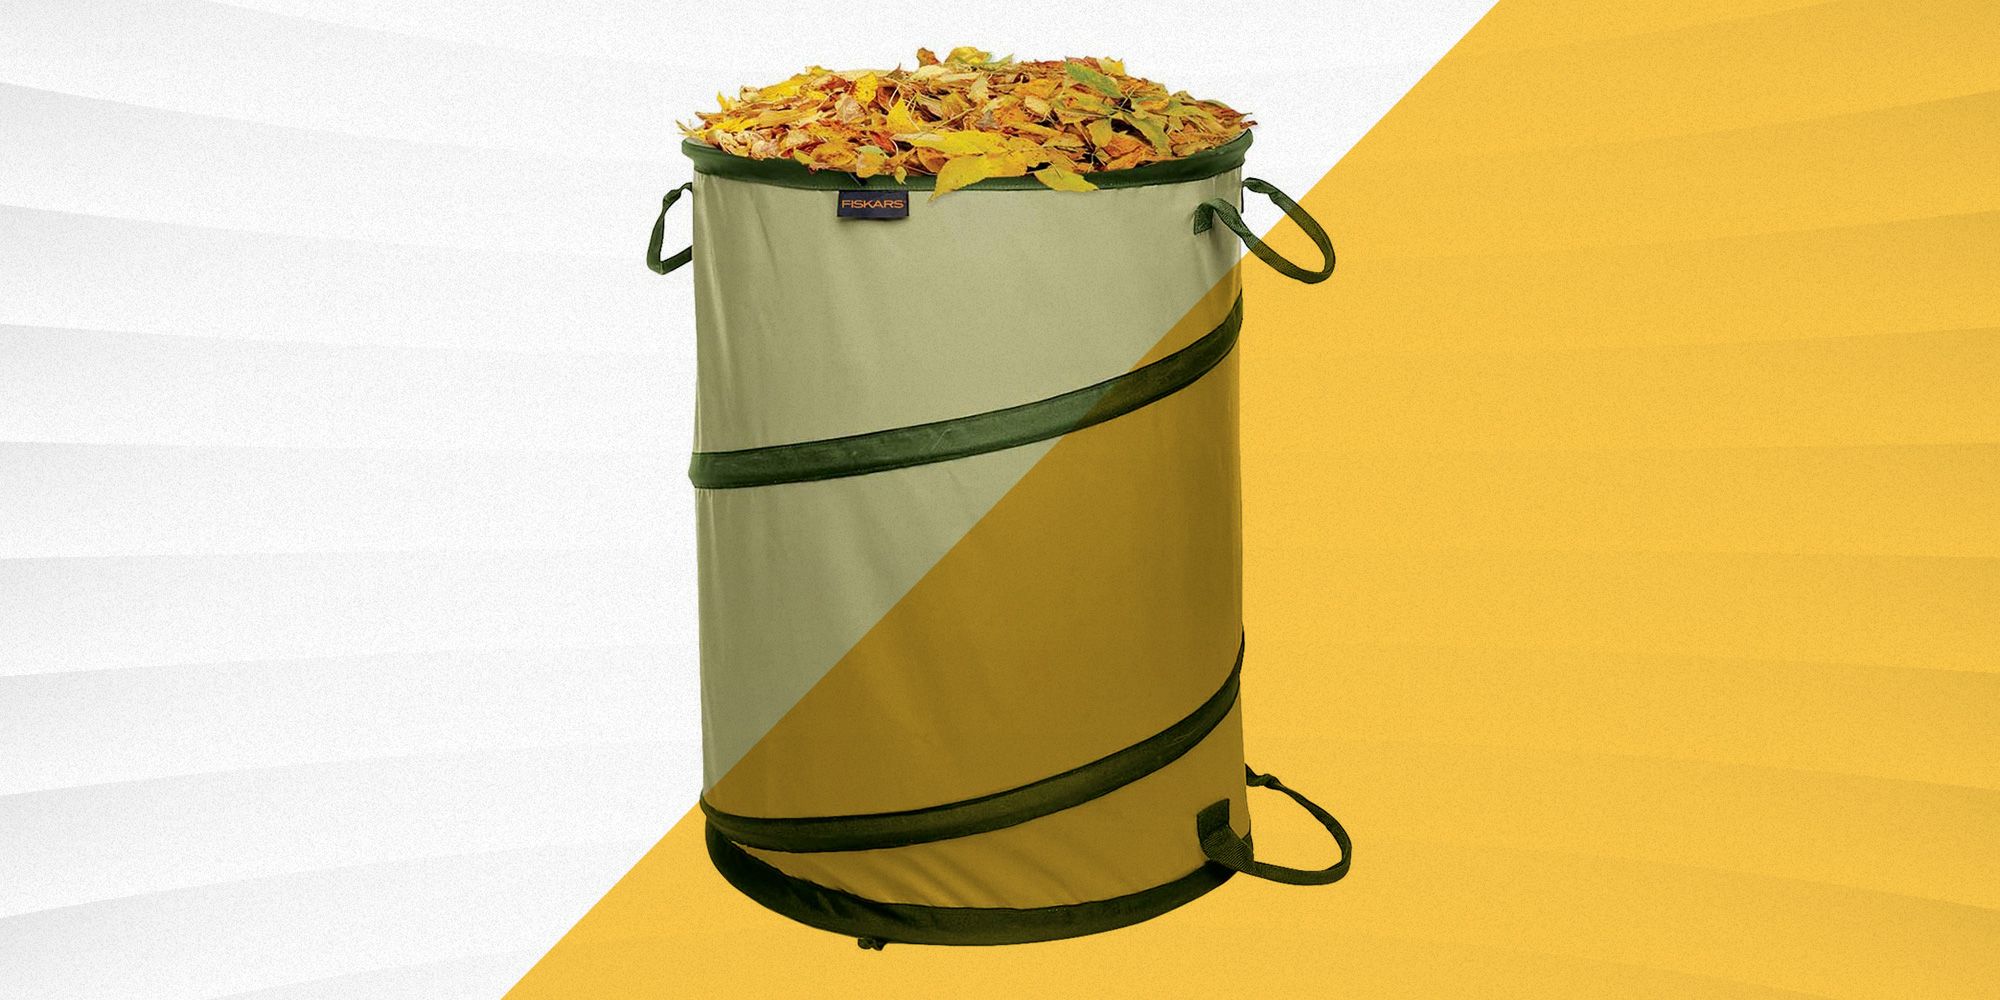 Rubbish Grass Sack with Lid Lockable Garden Garbage Bag with Zipper Waterproof 272L Self-Standing and Foldable and Reusable Tearproof Leaf Grass Bags with handles 1 pack Bcamelys Garden Waste Bags